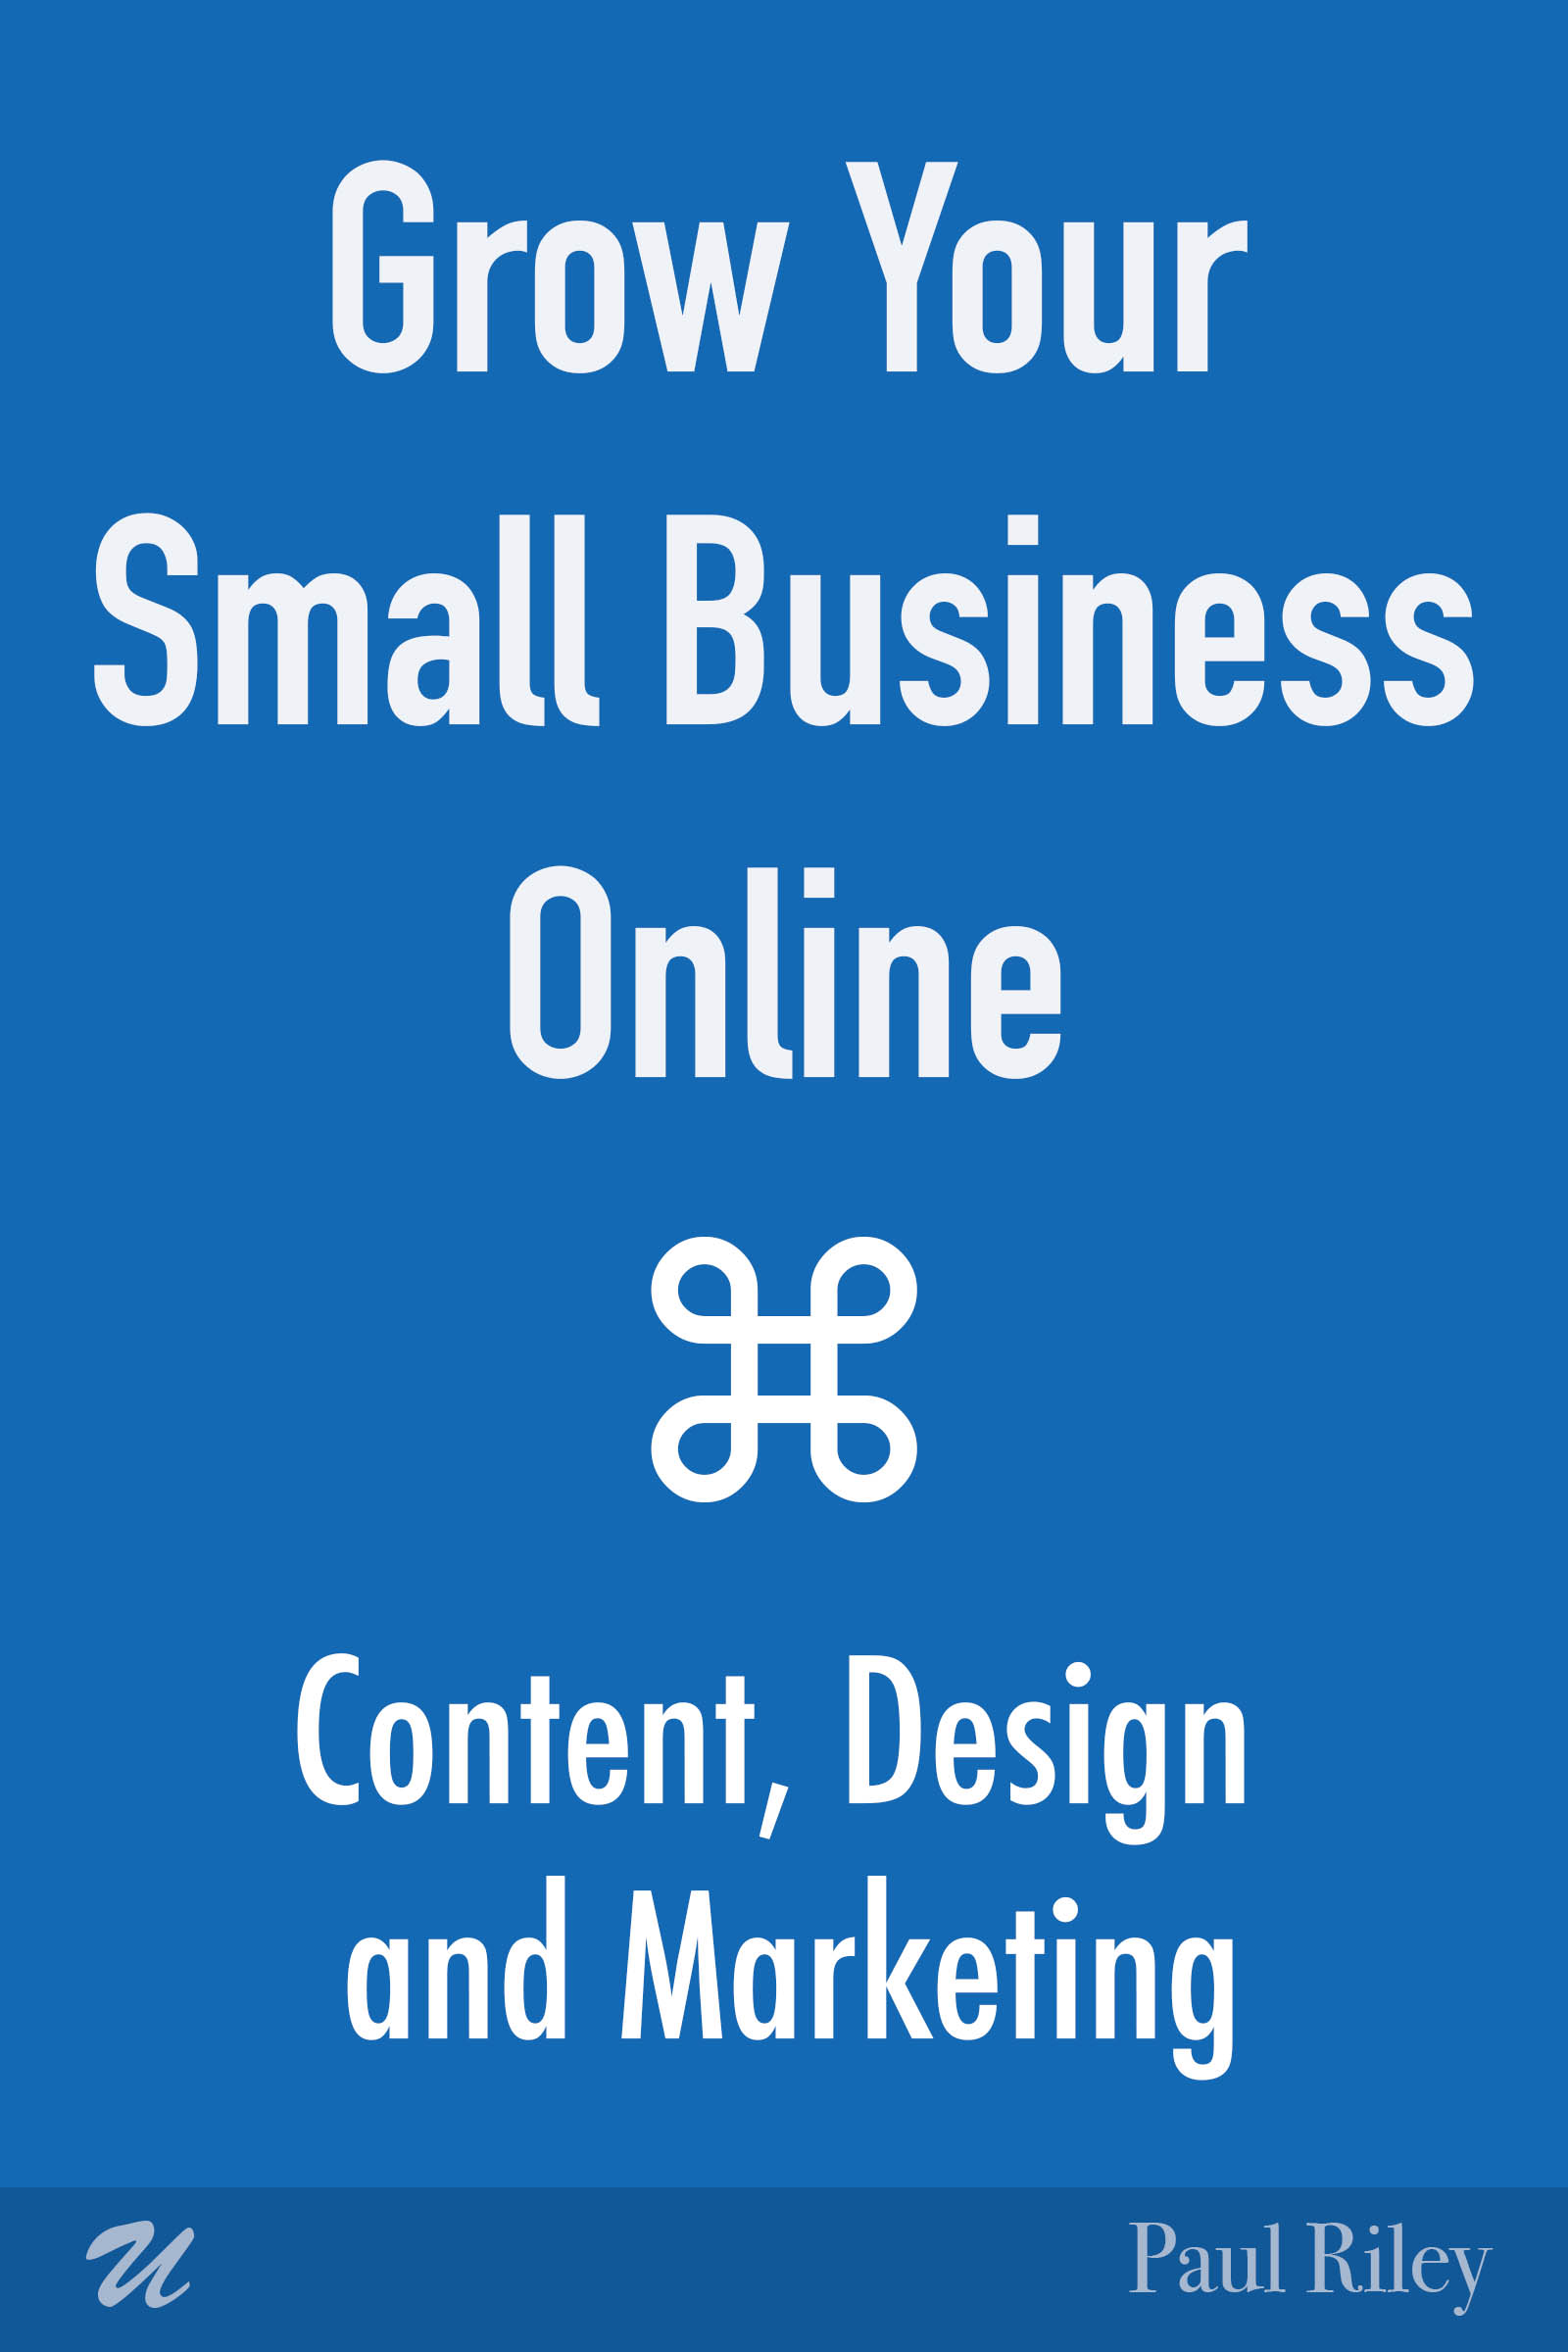 FREE: Grow Your Small Business Online by Paul Riley